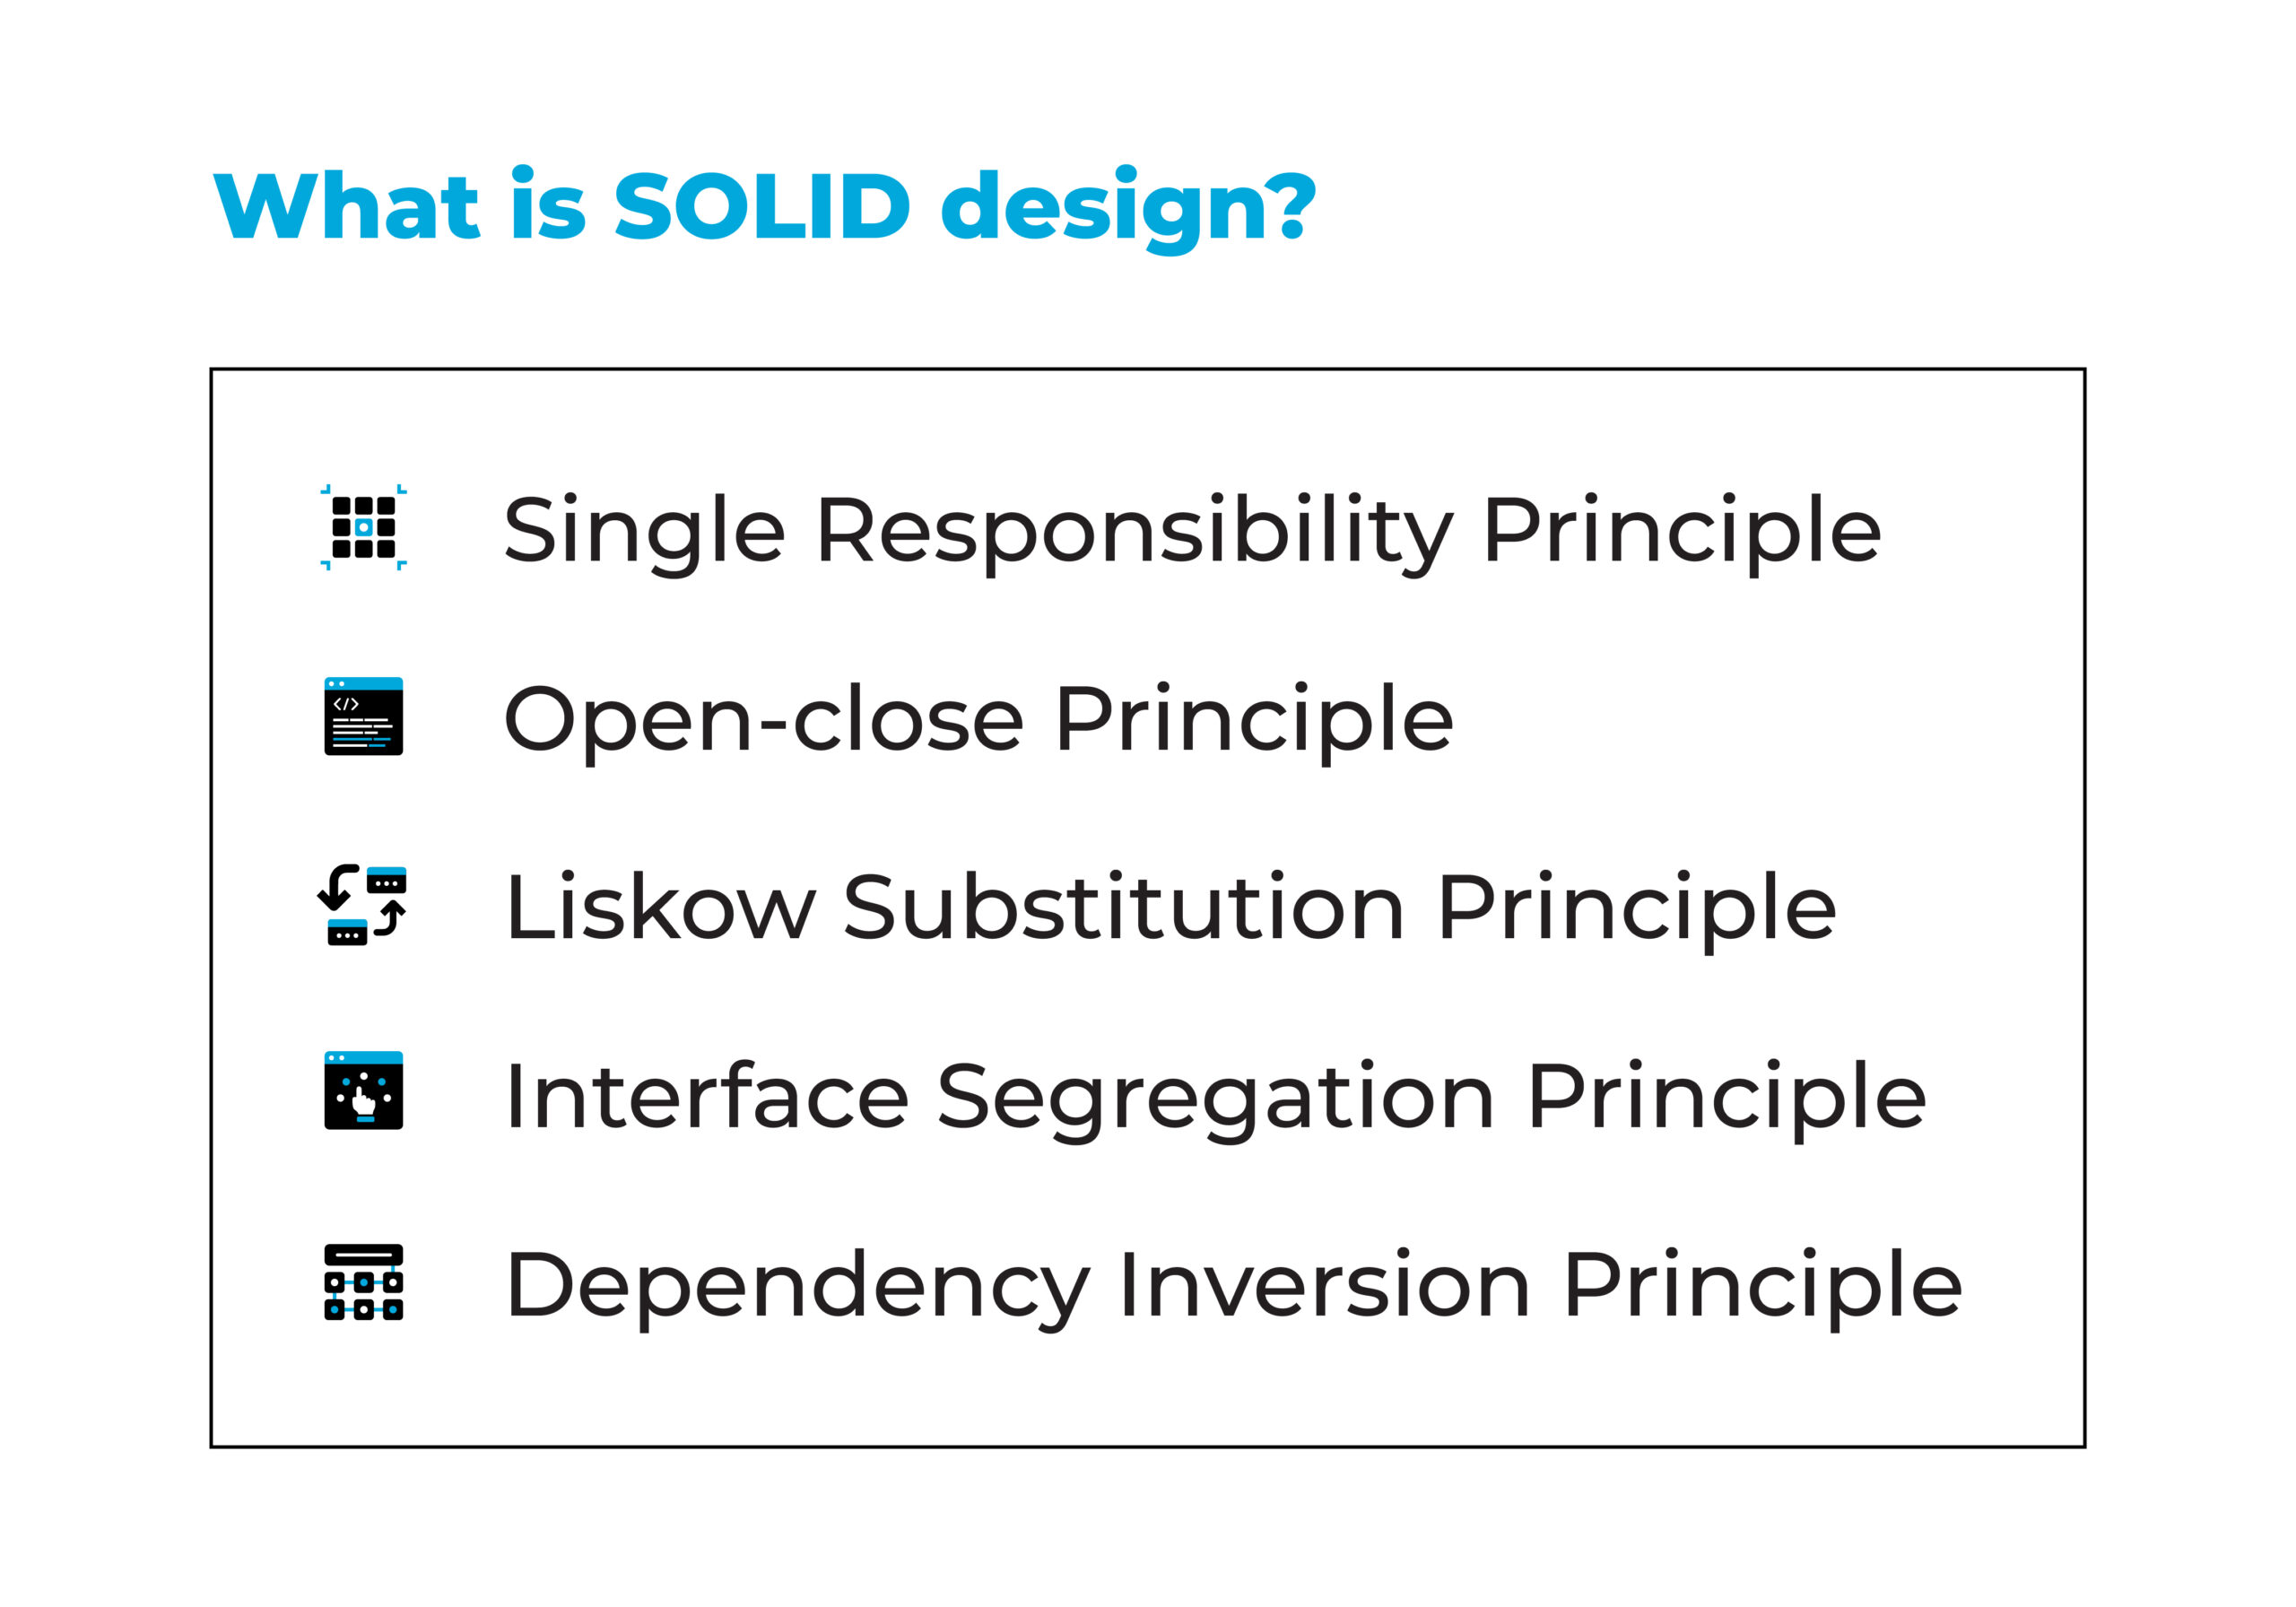 Why we need SOLID design principles